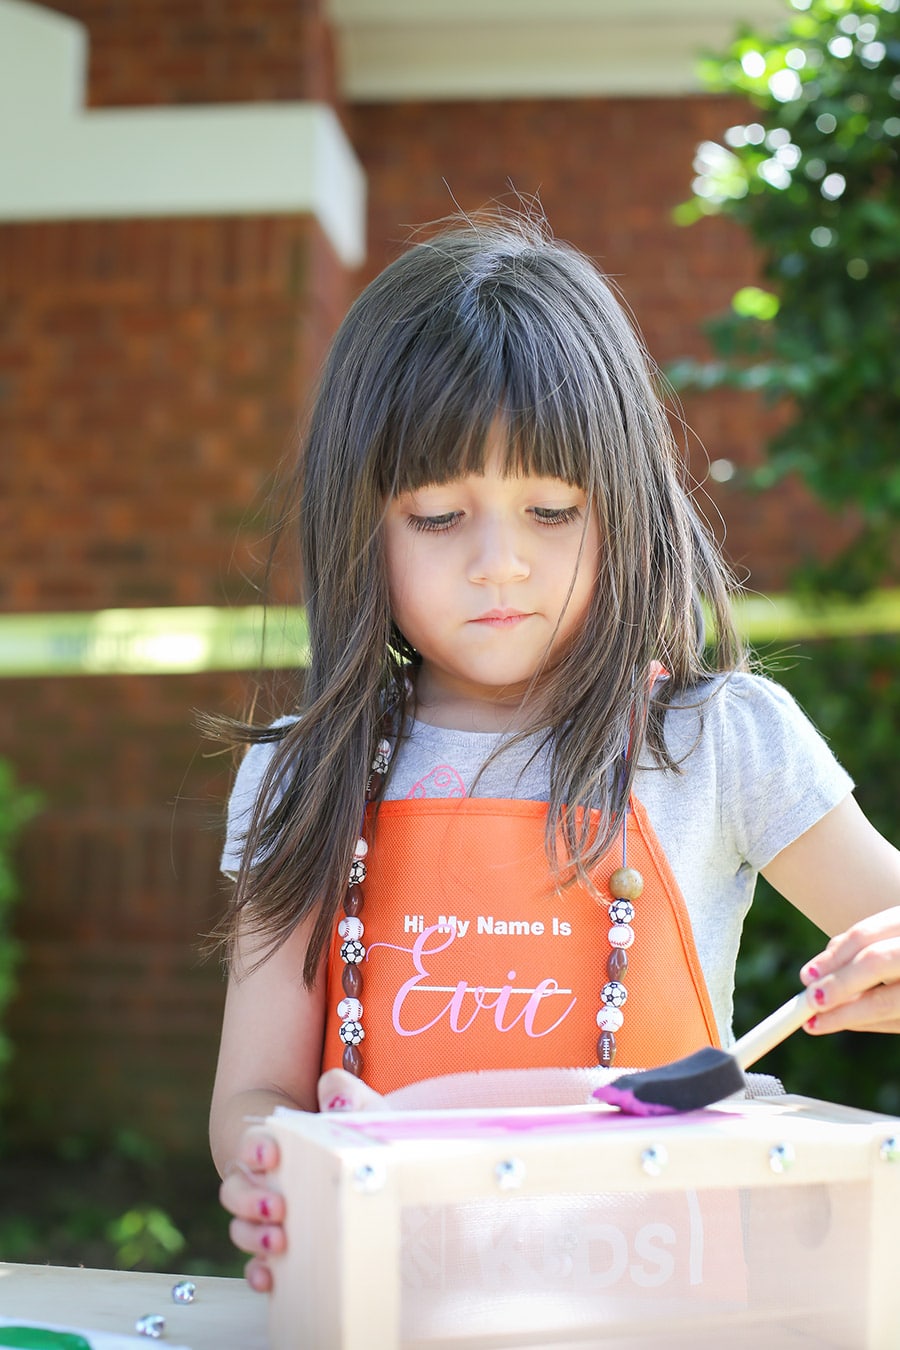 Host a fun kids party with Home Depot workshop building kits!